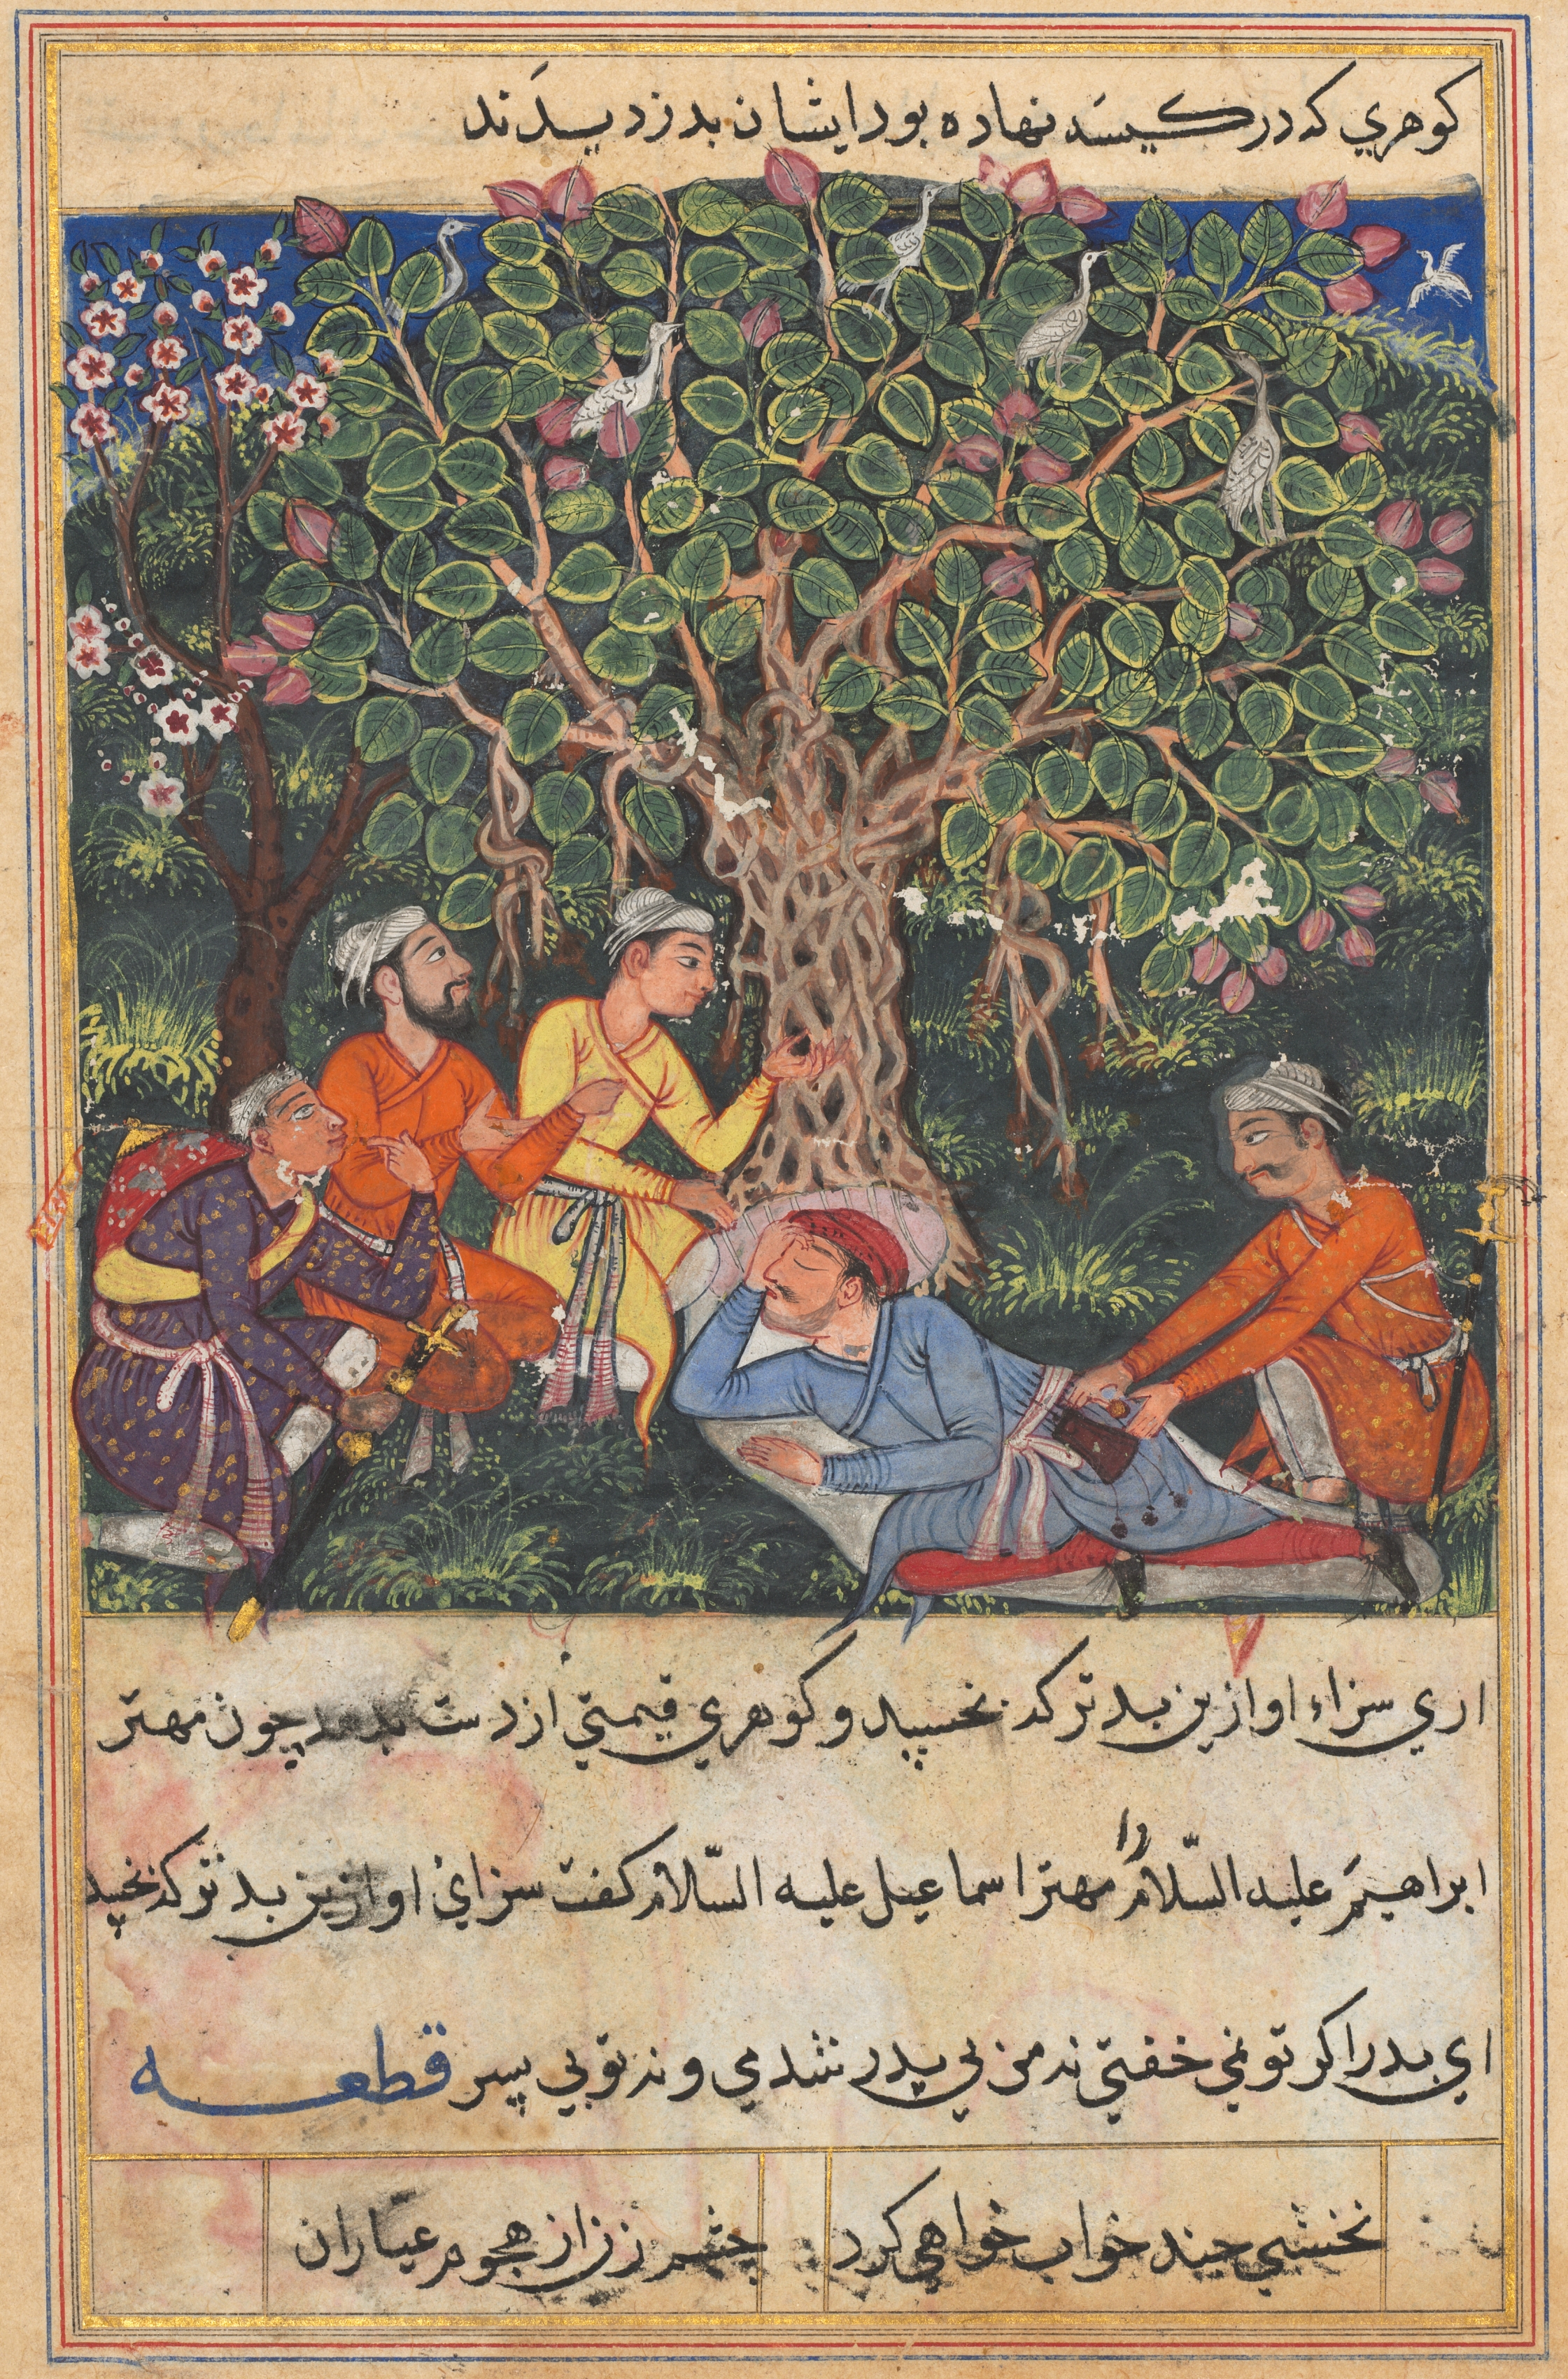 The street cleaner, on his way to meet King Bhojaraja, sleeps under a tree where four thieves disguised as fellow travelers deprive him of a priceless pearl, from a Tuti-nama (Tales of a Parrot): Twelfth Night